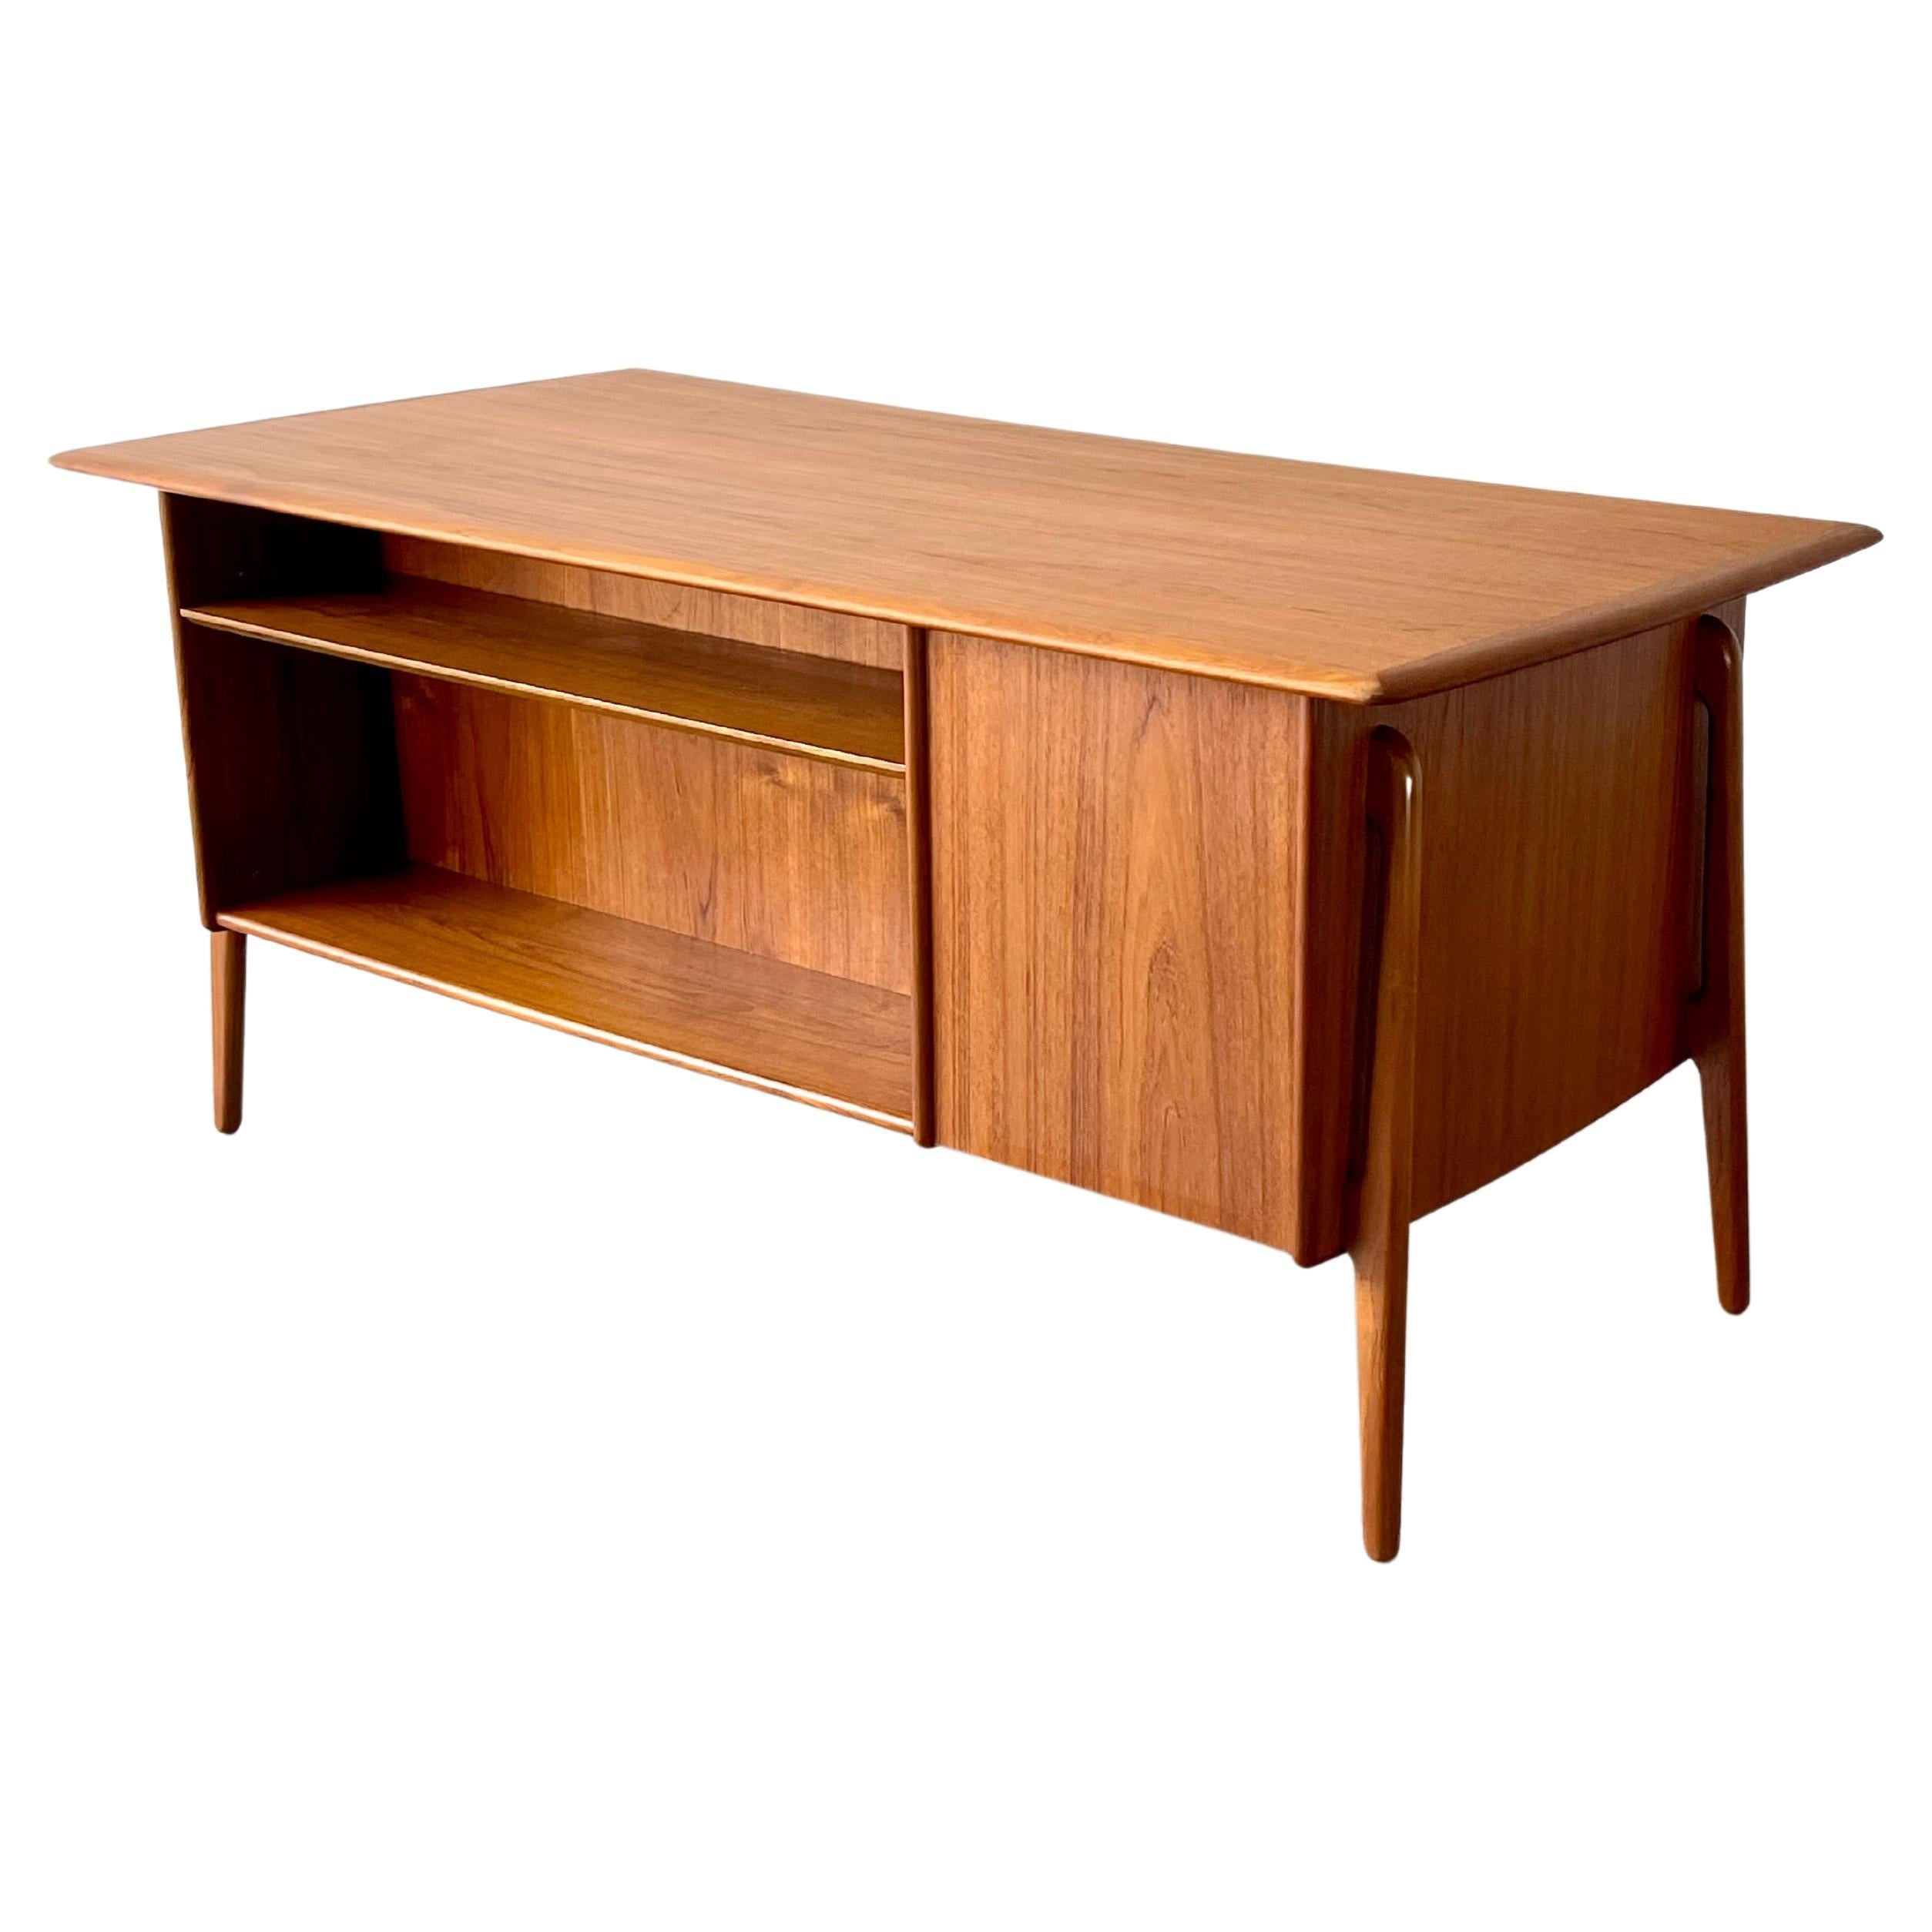 Mid-Century Danish Modern Svend Madsen teak executive bookcase desk

Rare and beautiful Svend Madsen designed teak executive desk with book case on public side, file drawer and slide out (slide out is perfect for a laptop) return on left and three